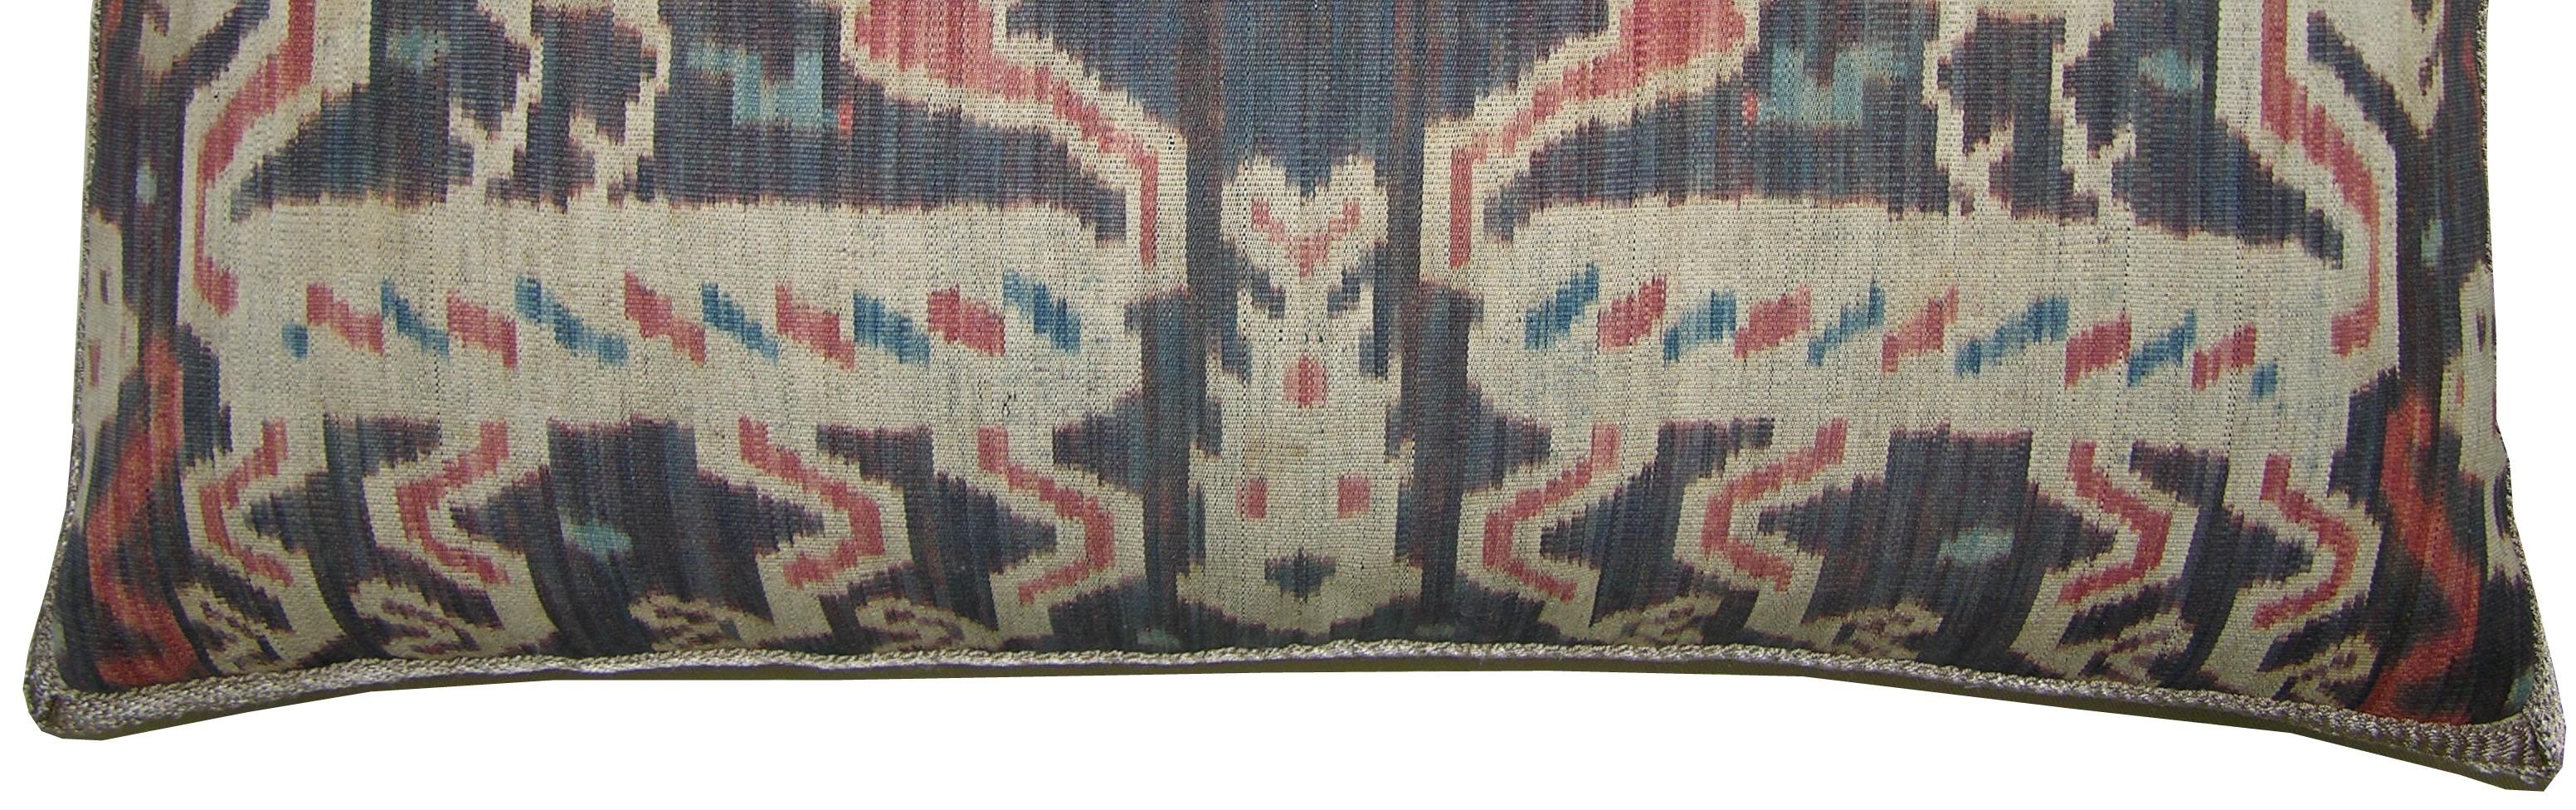 Unknown Circa 1850 Antique Ikat Tapestry Pillow For Sale